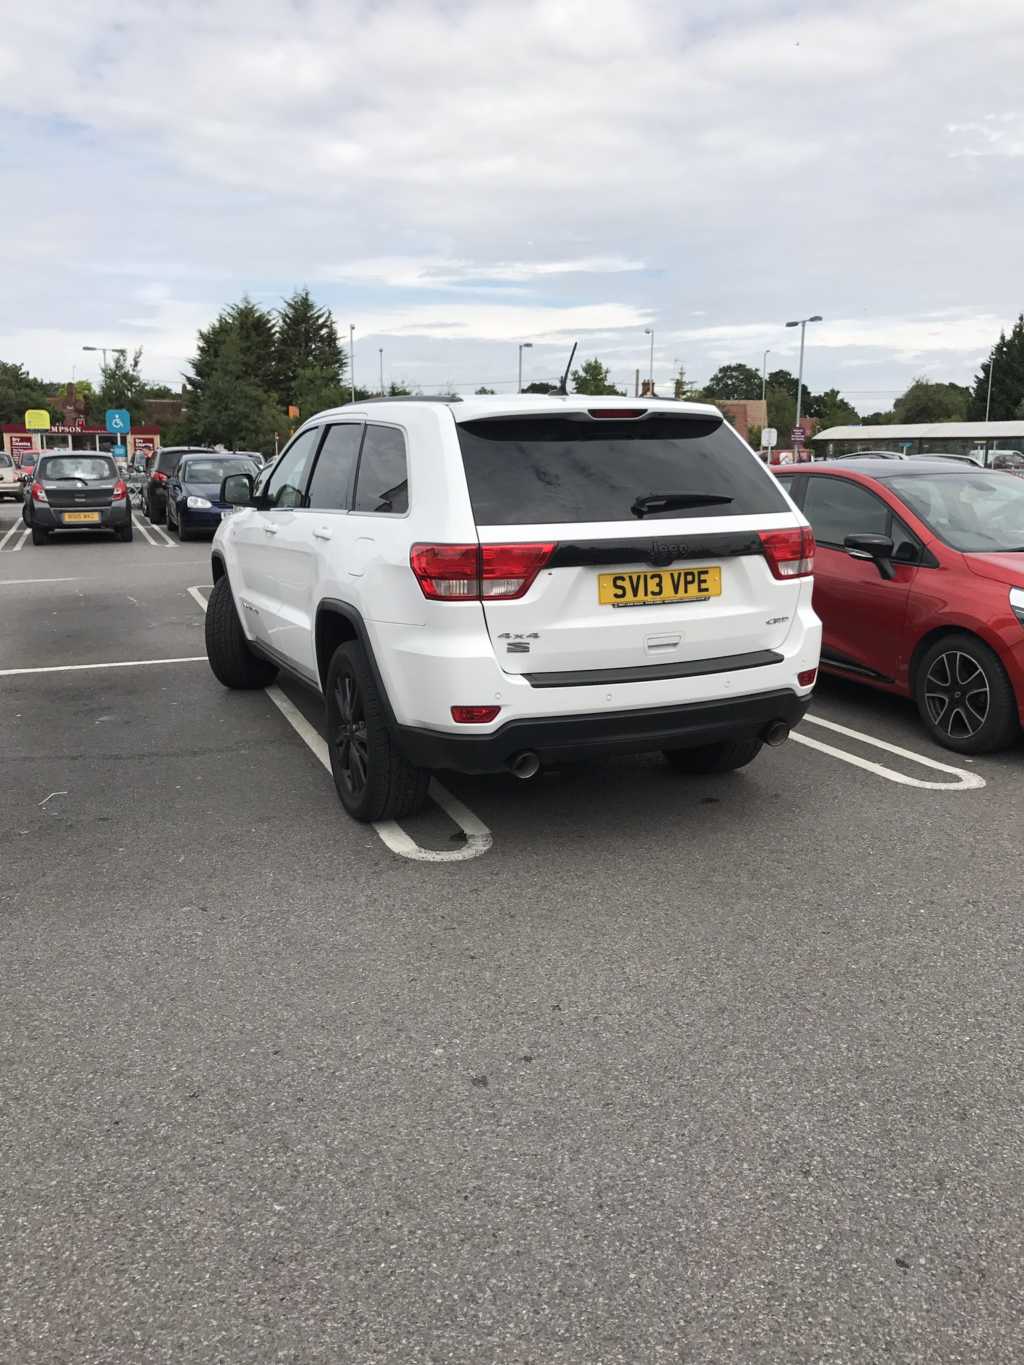 SV13 YPE is a Selfish Parker